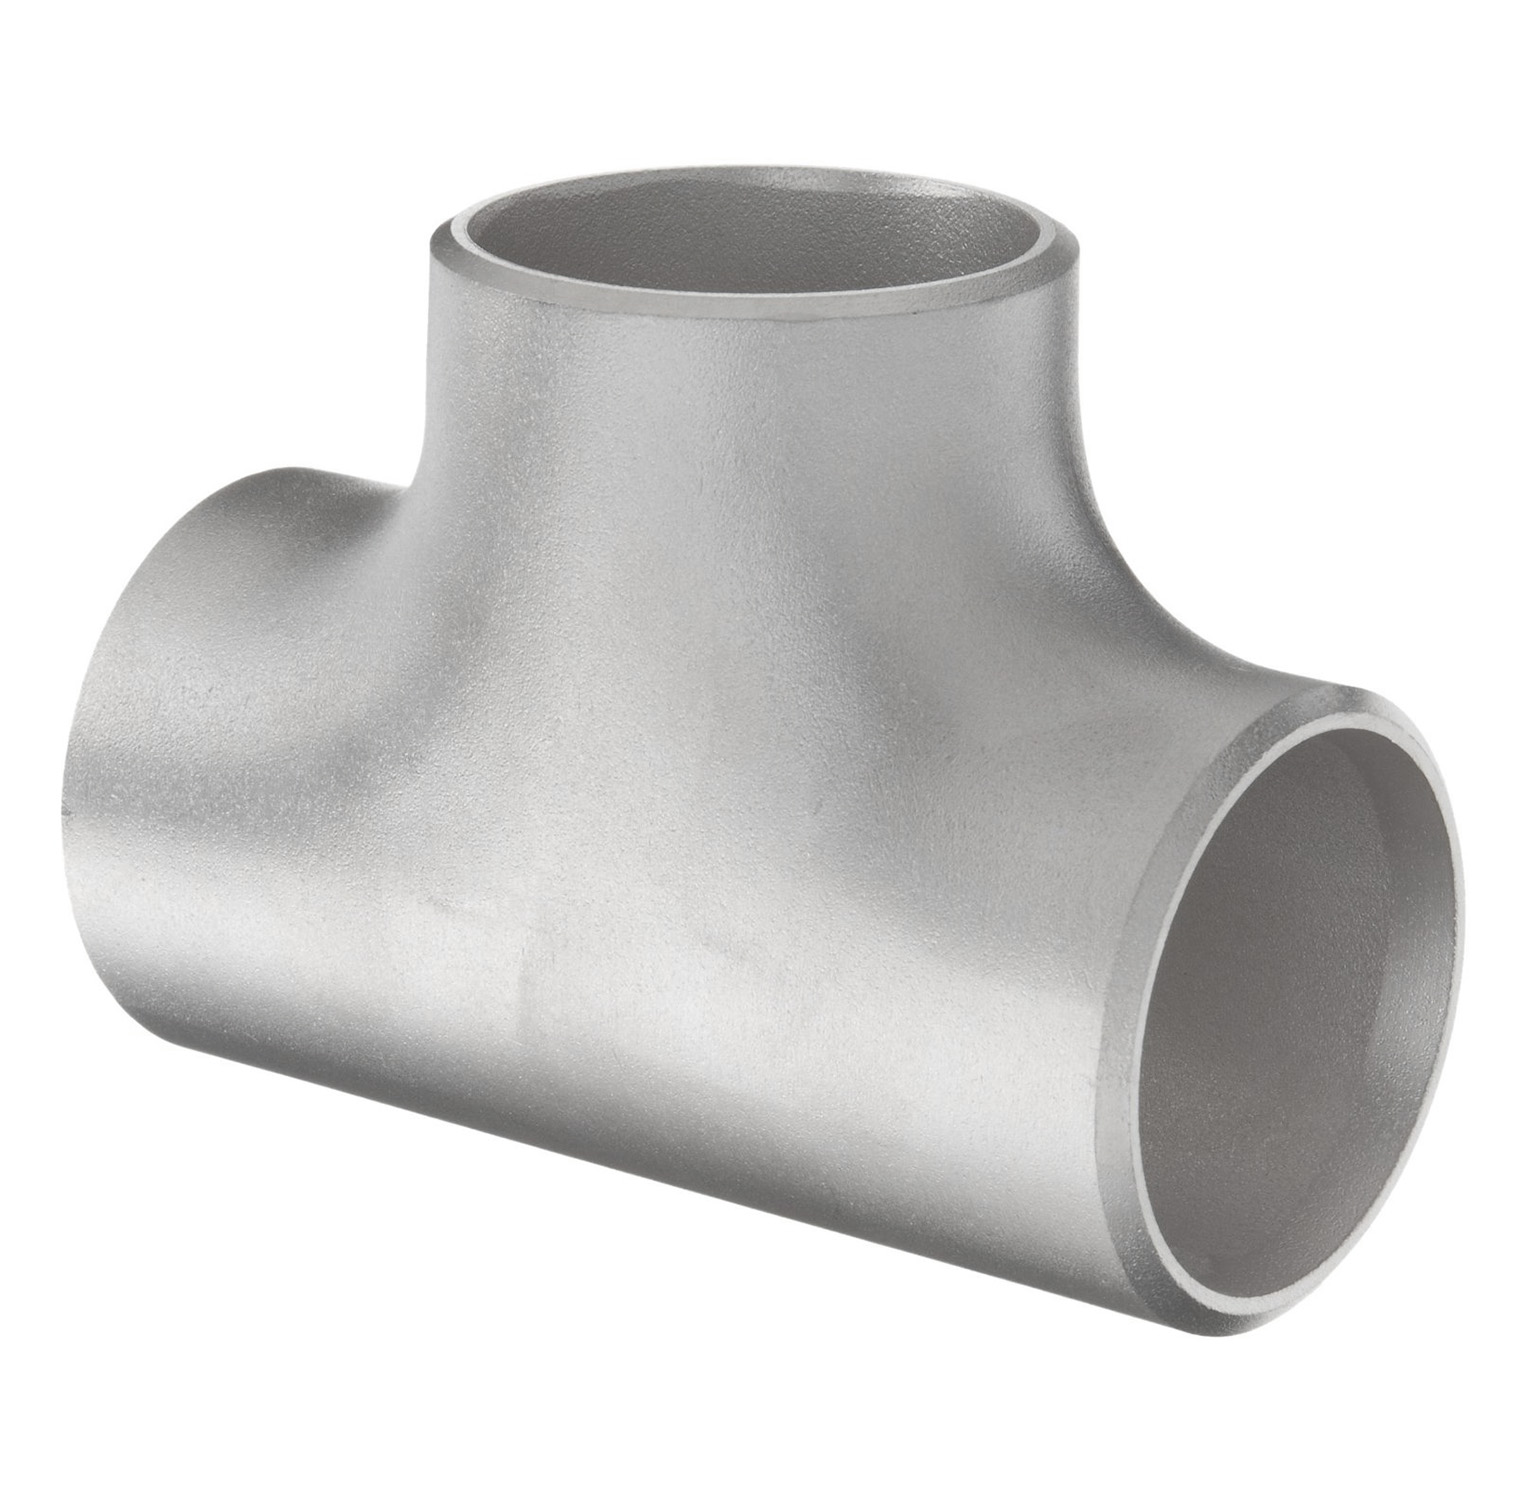 All Sizes 304 Stainless Steel Sanitary Weld Thé Connector Pipe Fitting 